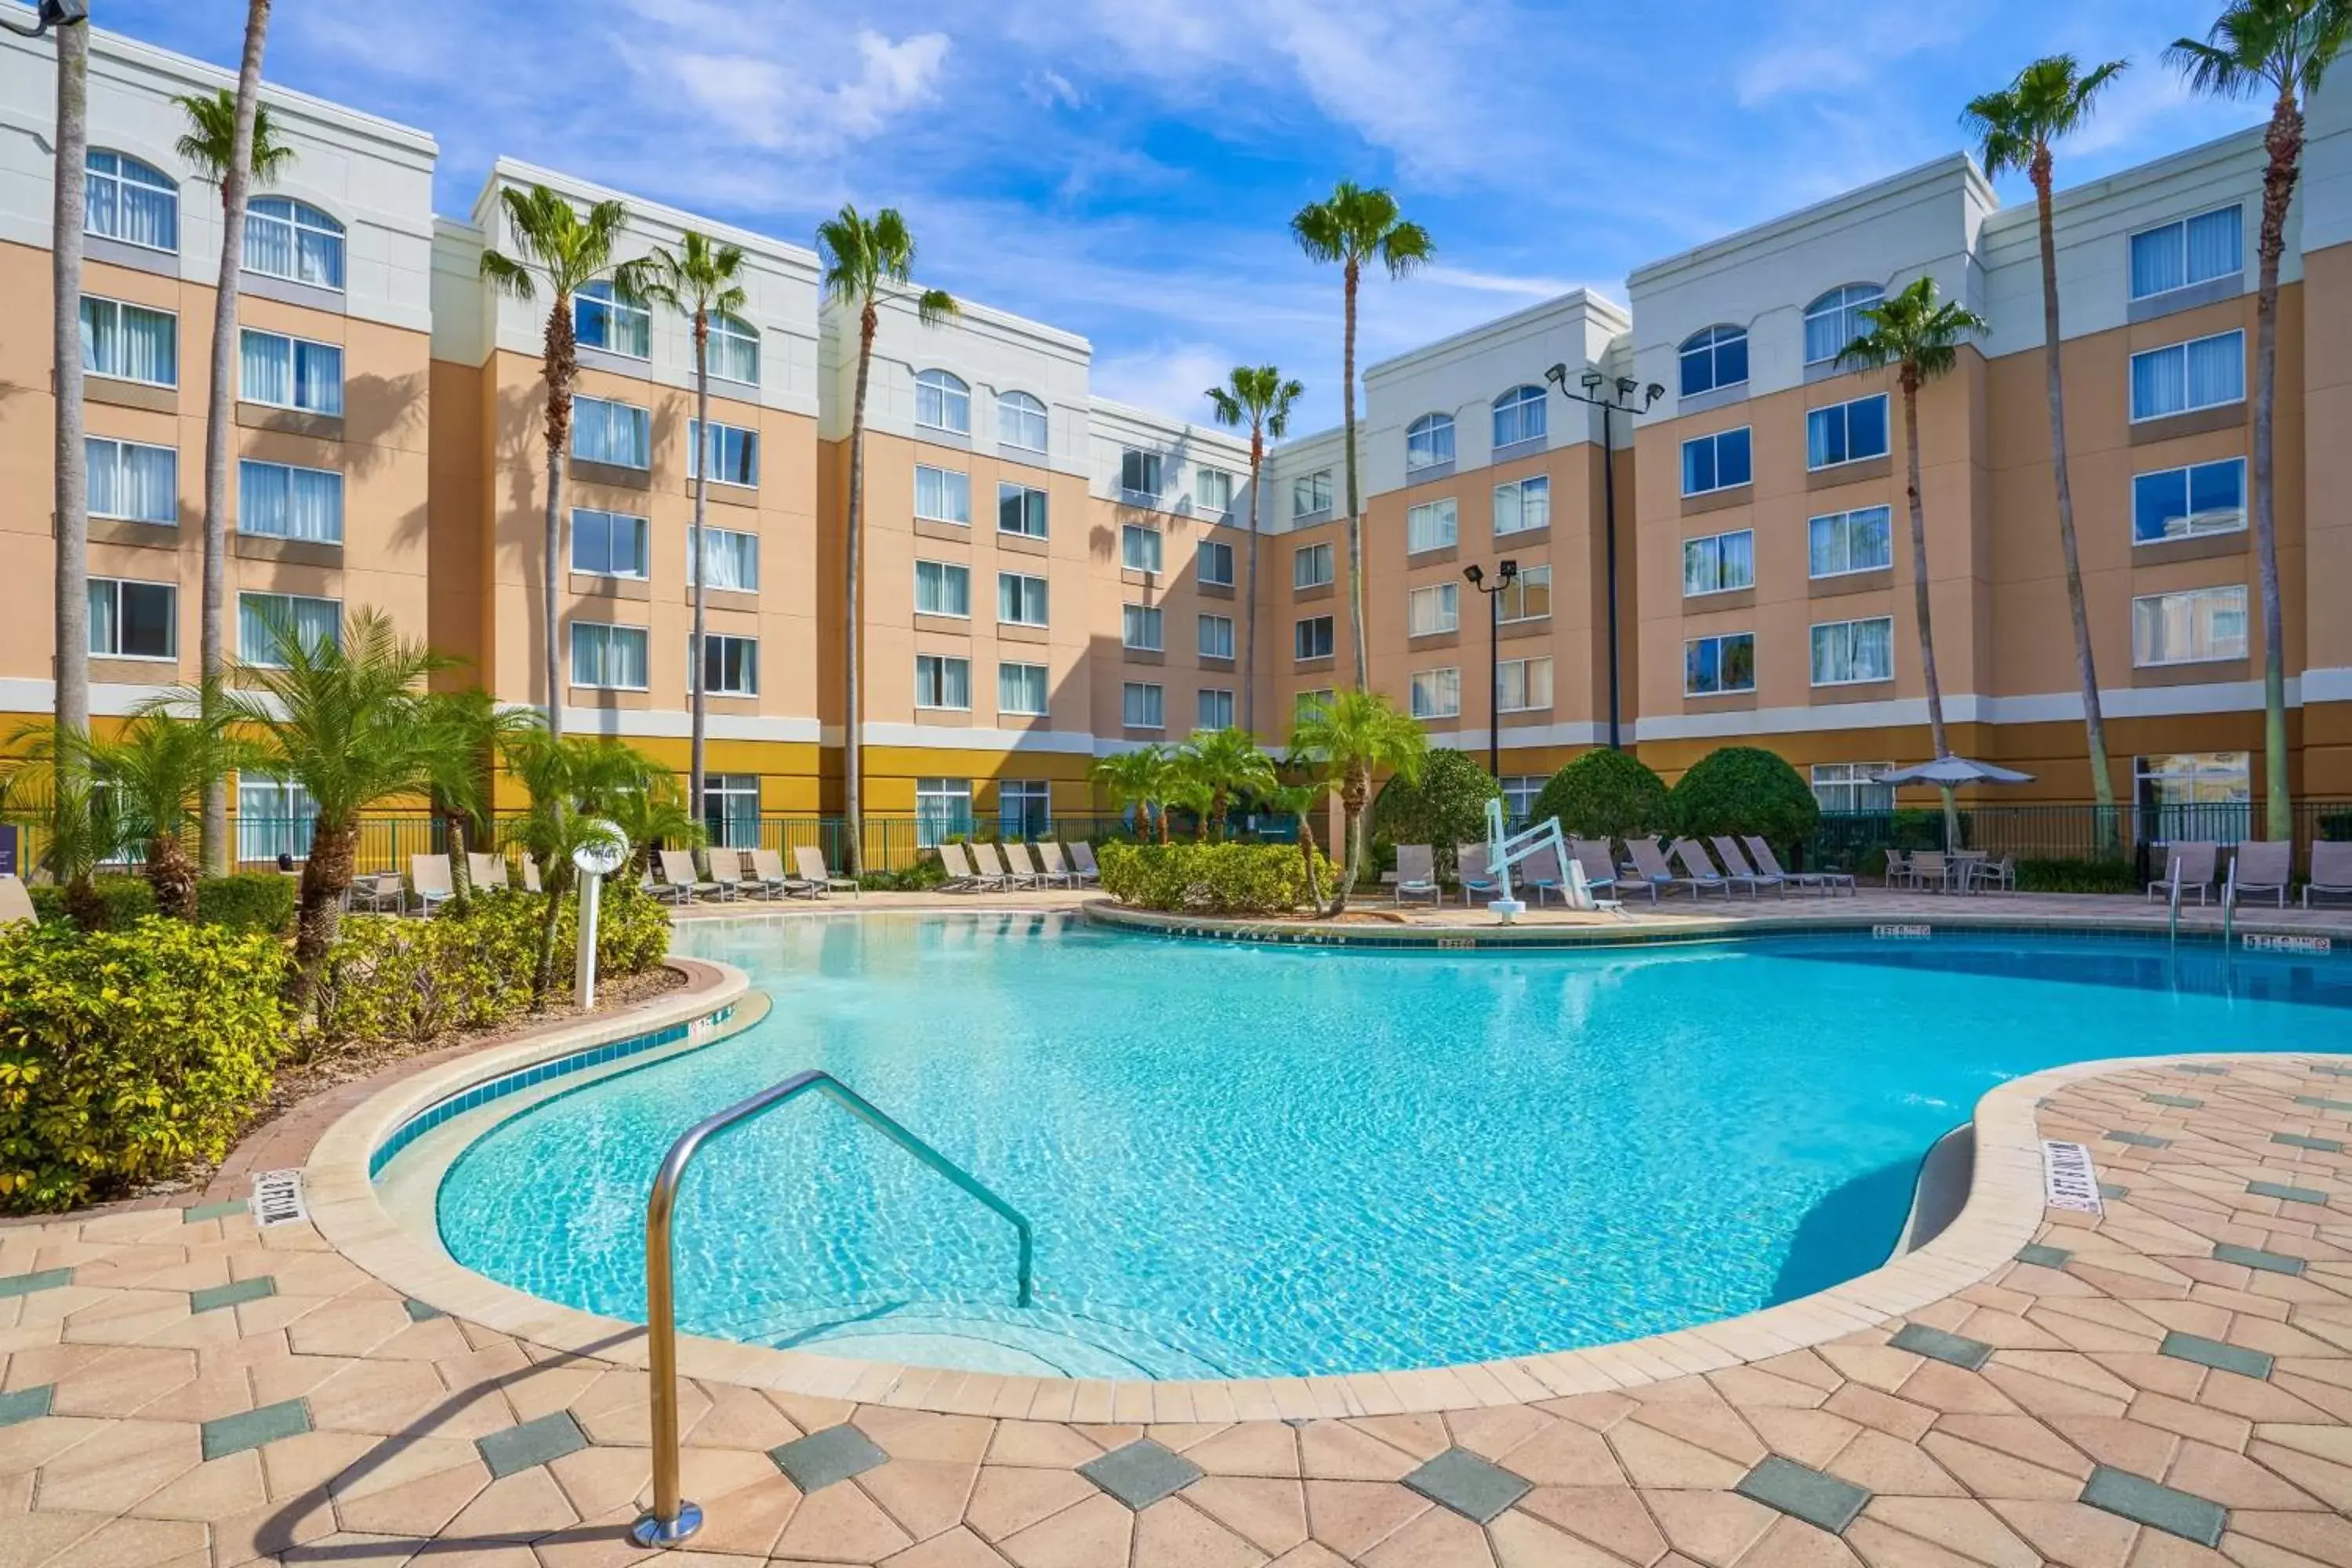 Swimming pool, Property Building in SpringHill Suites by Marriott Orlando Lake Buena Vista in Marriott Village